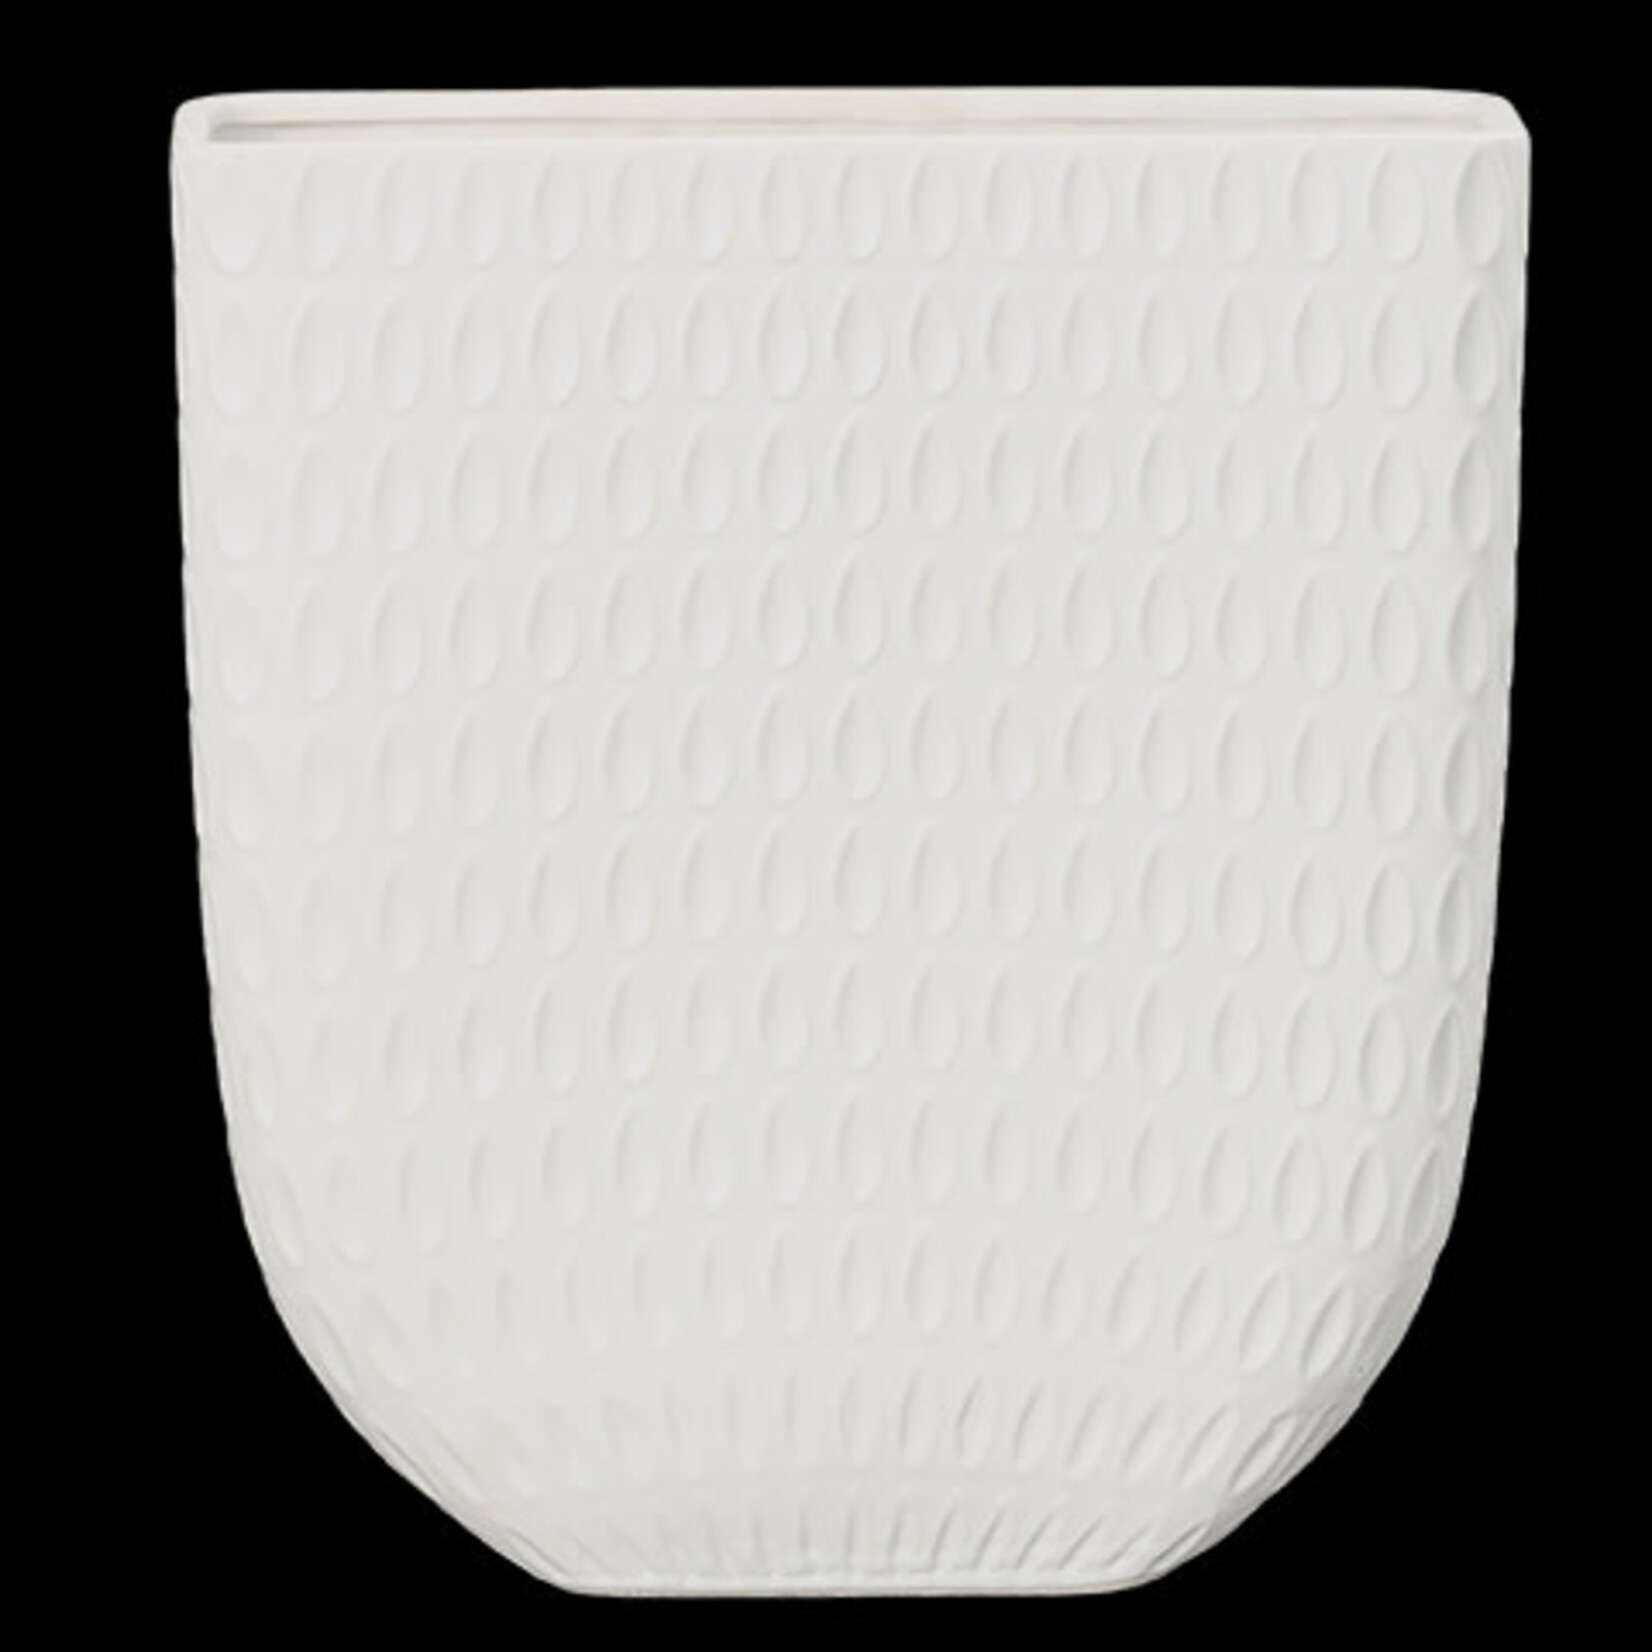 14.54”h x 4.5”w x 13.25”L WHITE Ceramic Rectangle Vase with Pressed Elliptical Pattern Design Body and Tapered Bottom